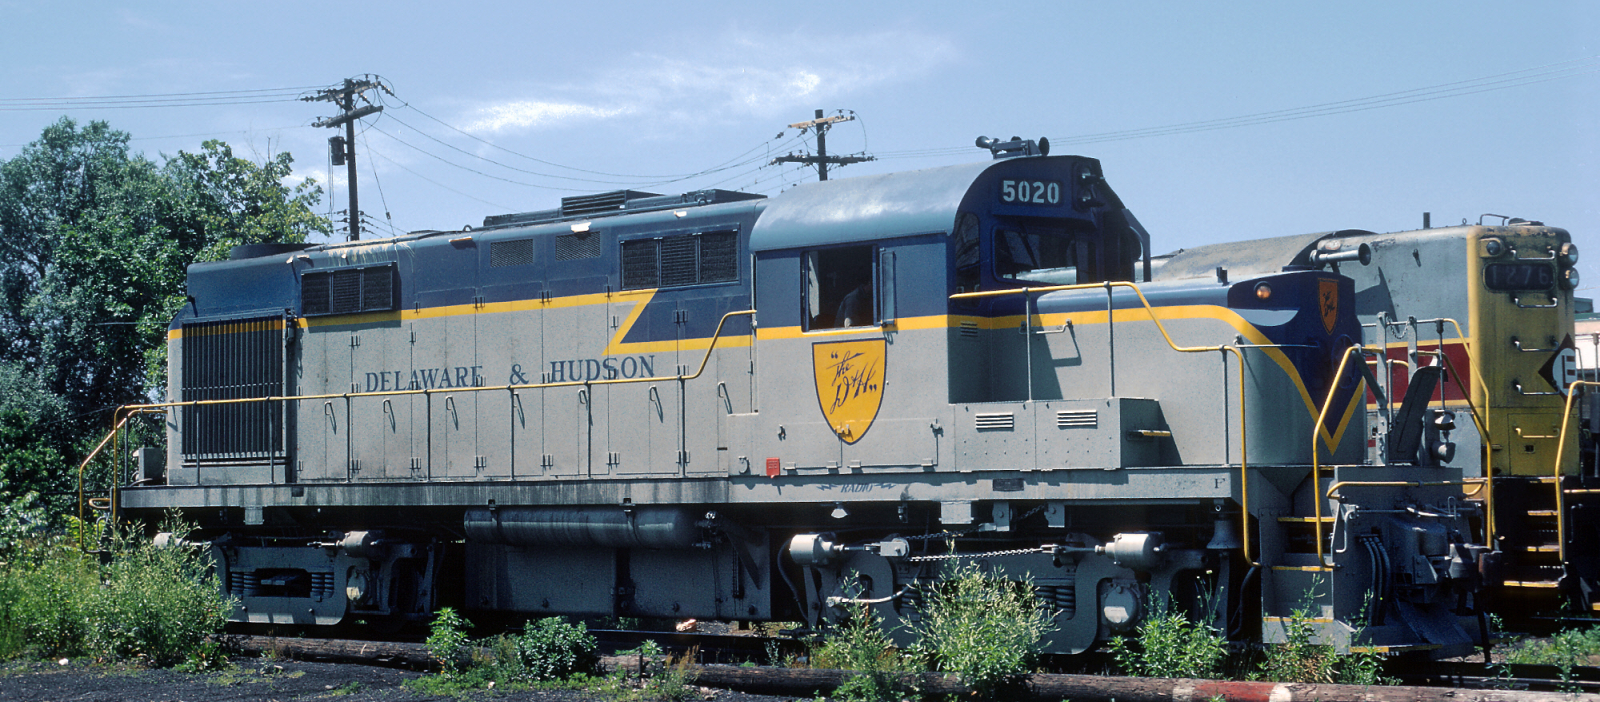 Delaware & Hudson RS-36 No. 5020 in August 1971